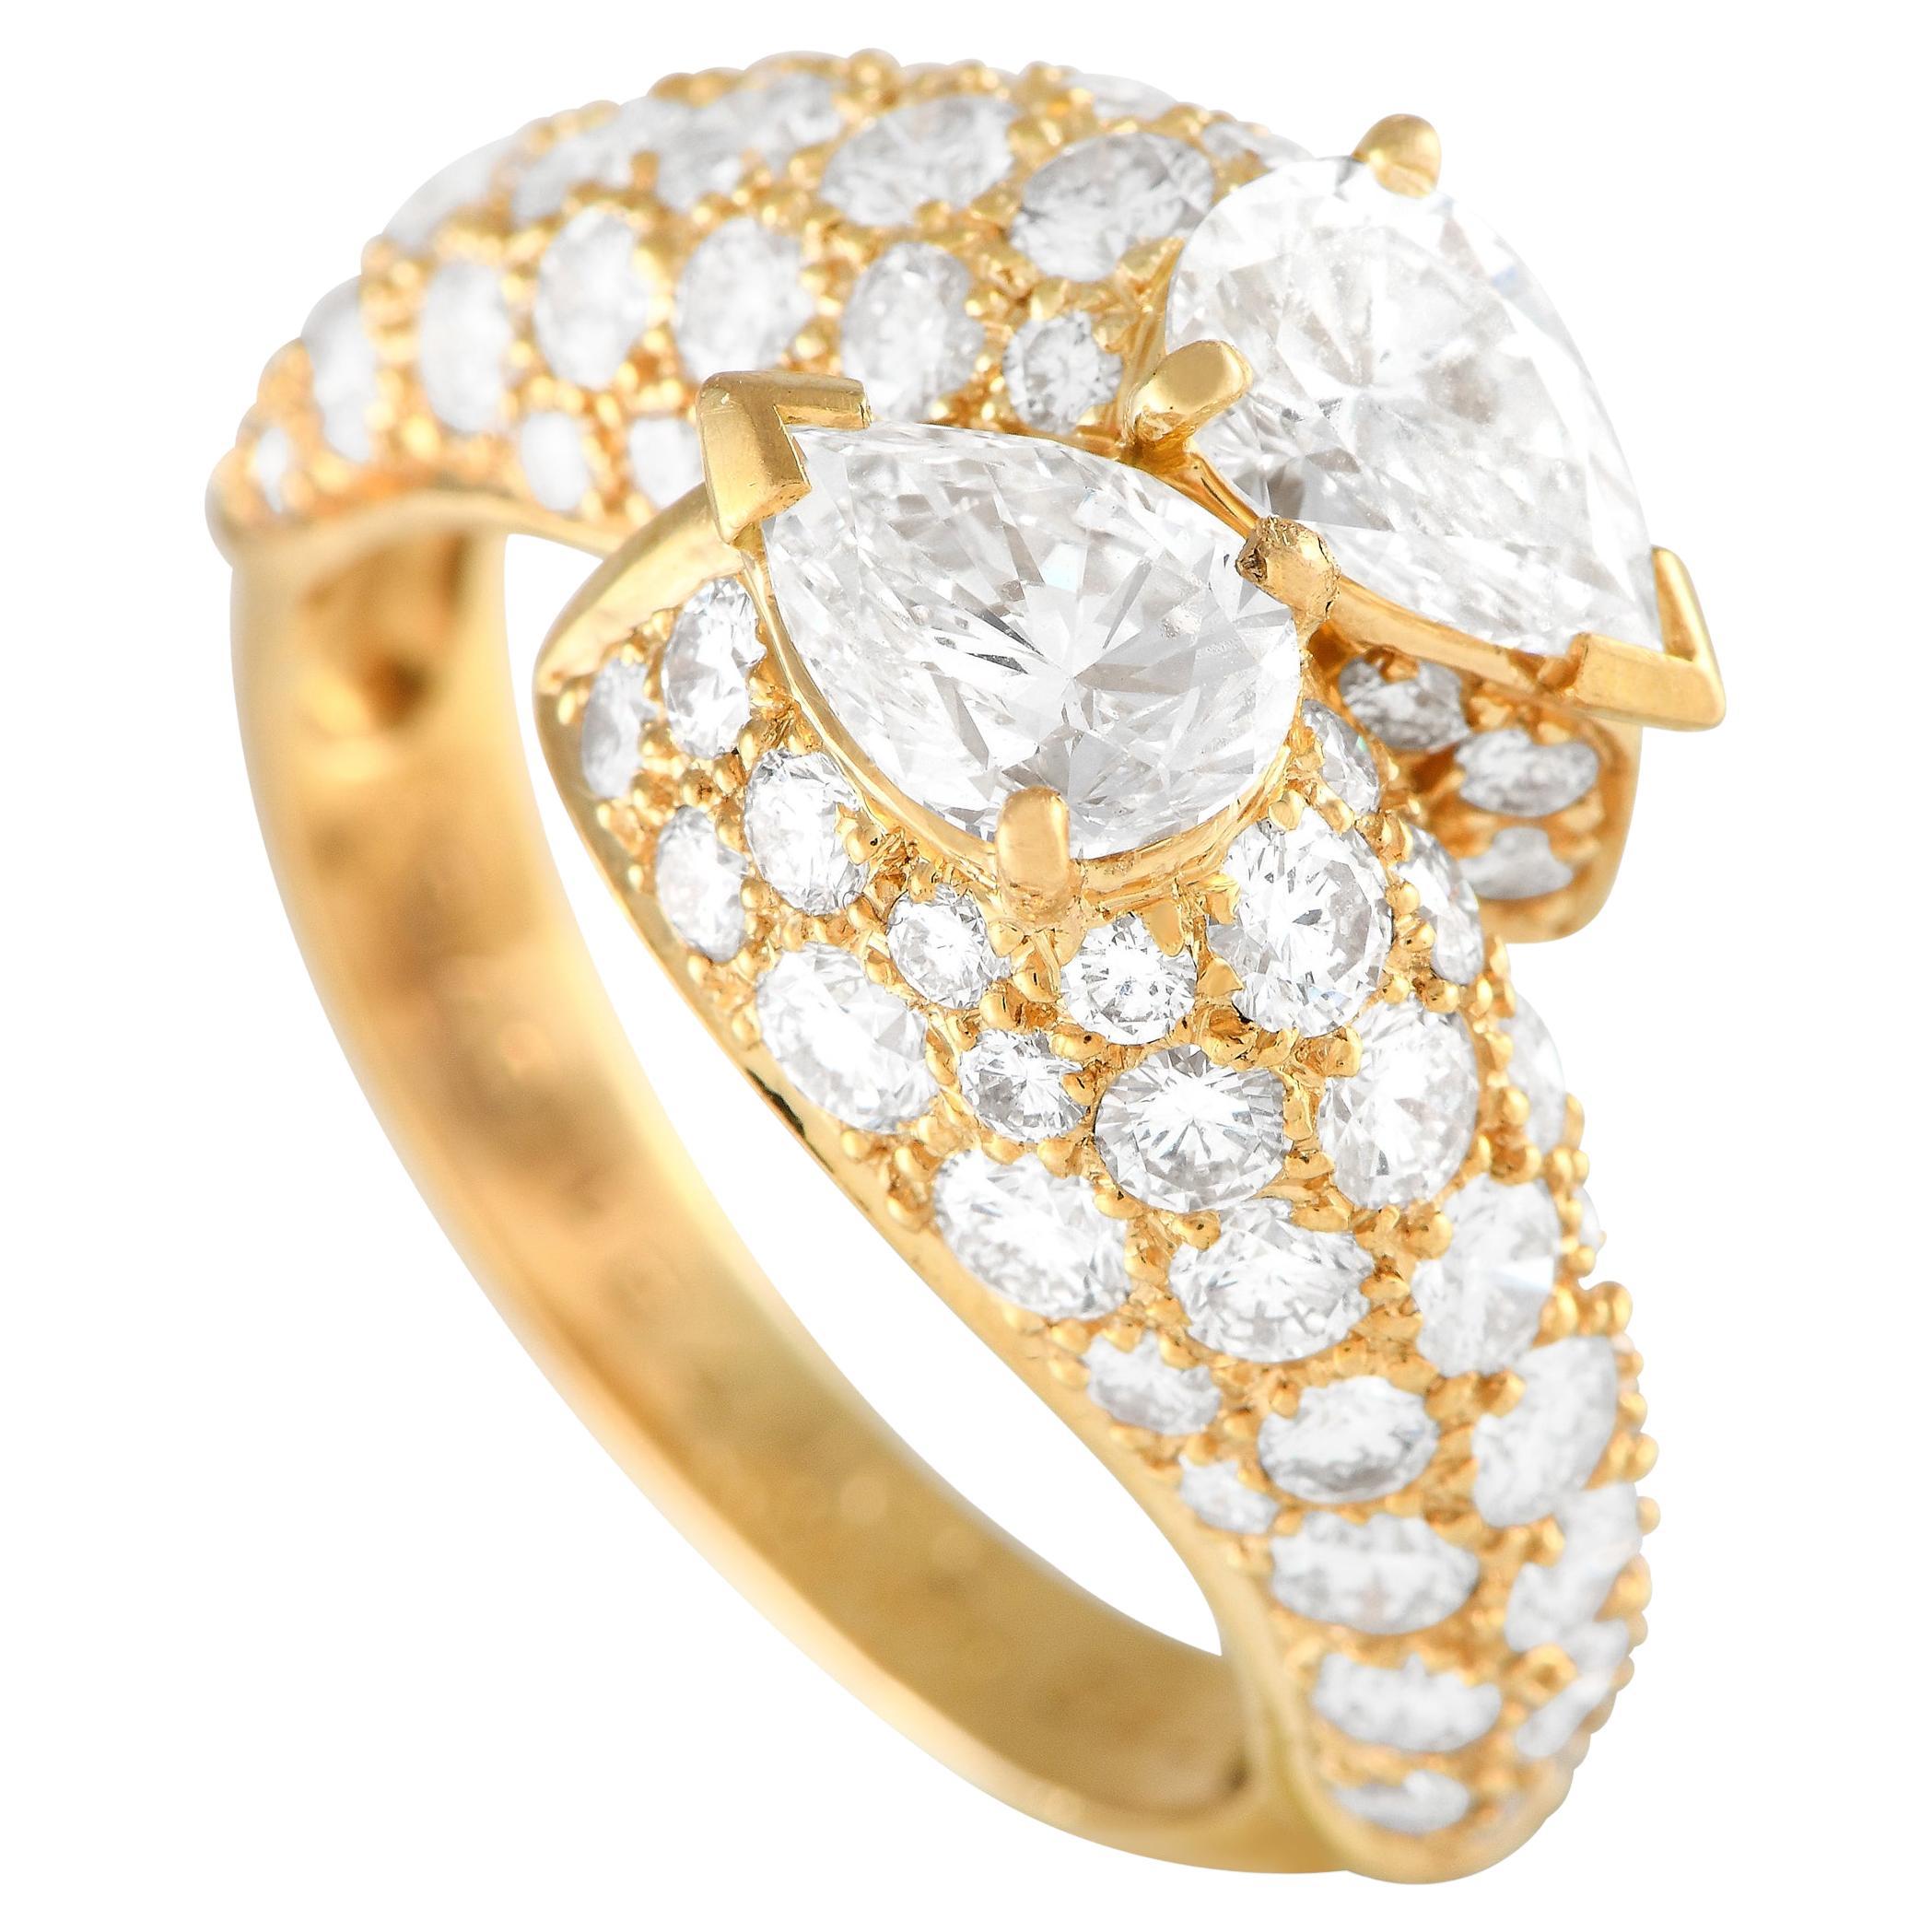 Cartier 18k Yellow Gold 3.22 Carat Diamond Crossover Ring For Sale